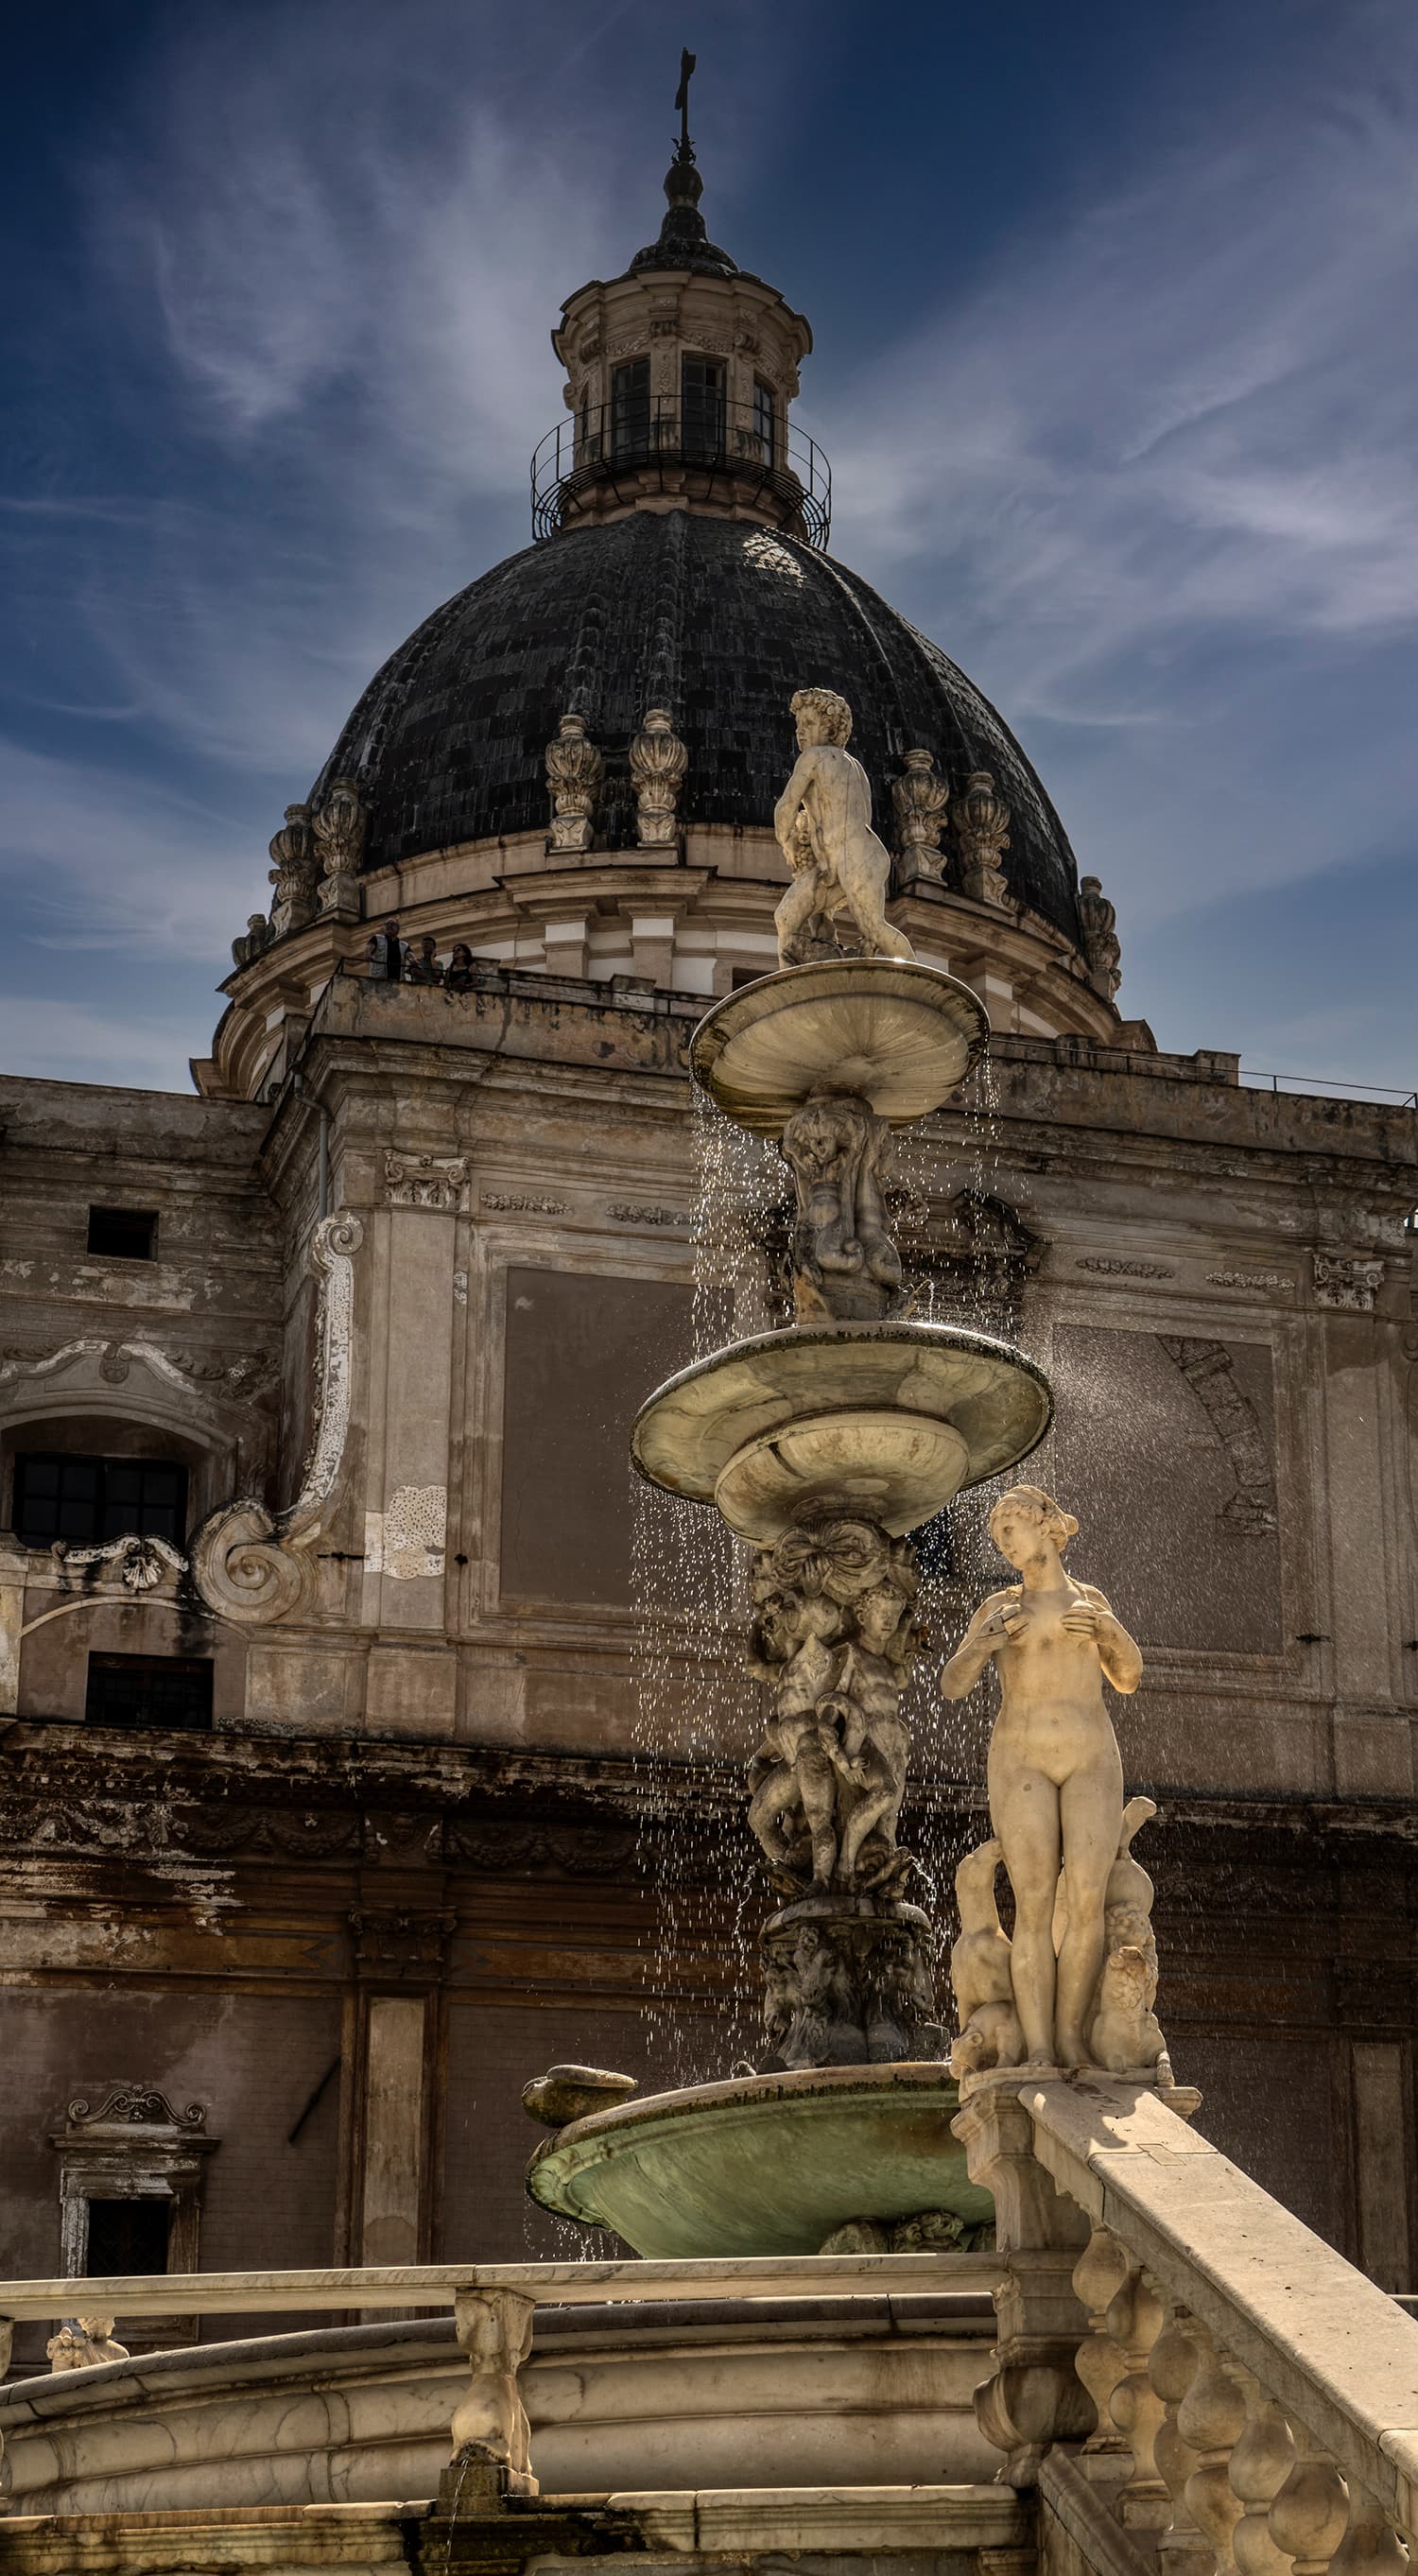 Fountains and baroque palace in Palermo, Sicily, Italy